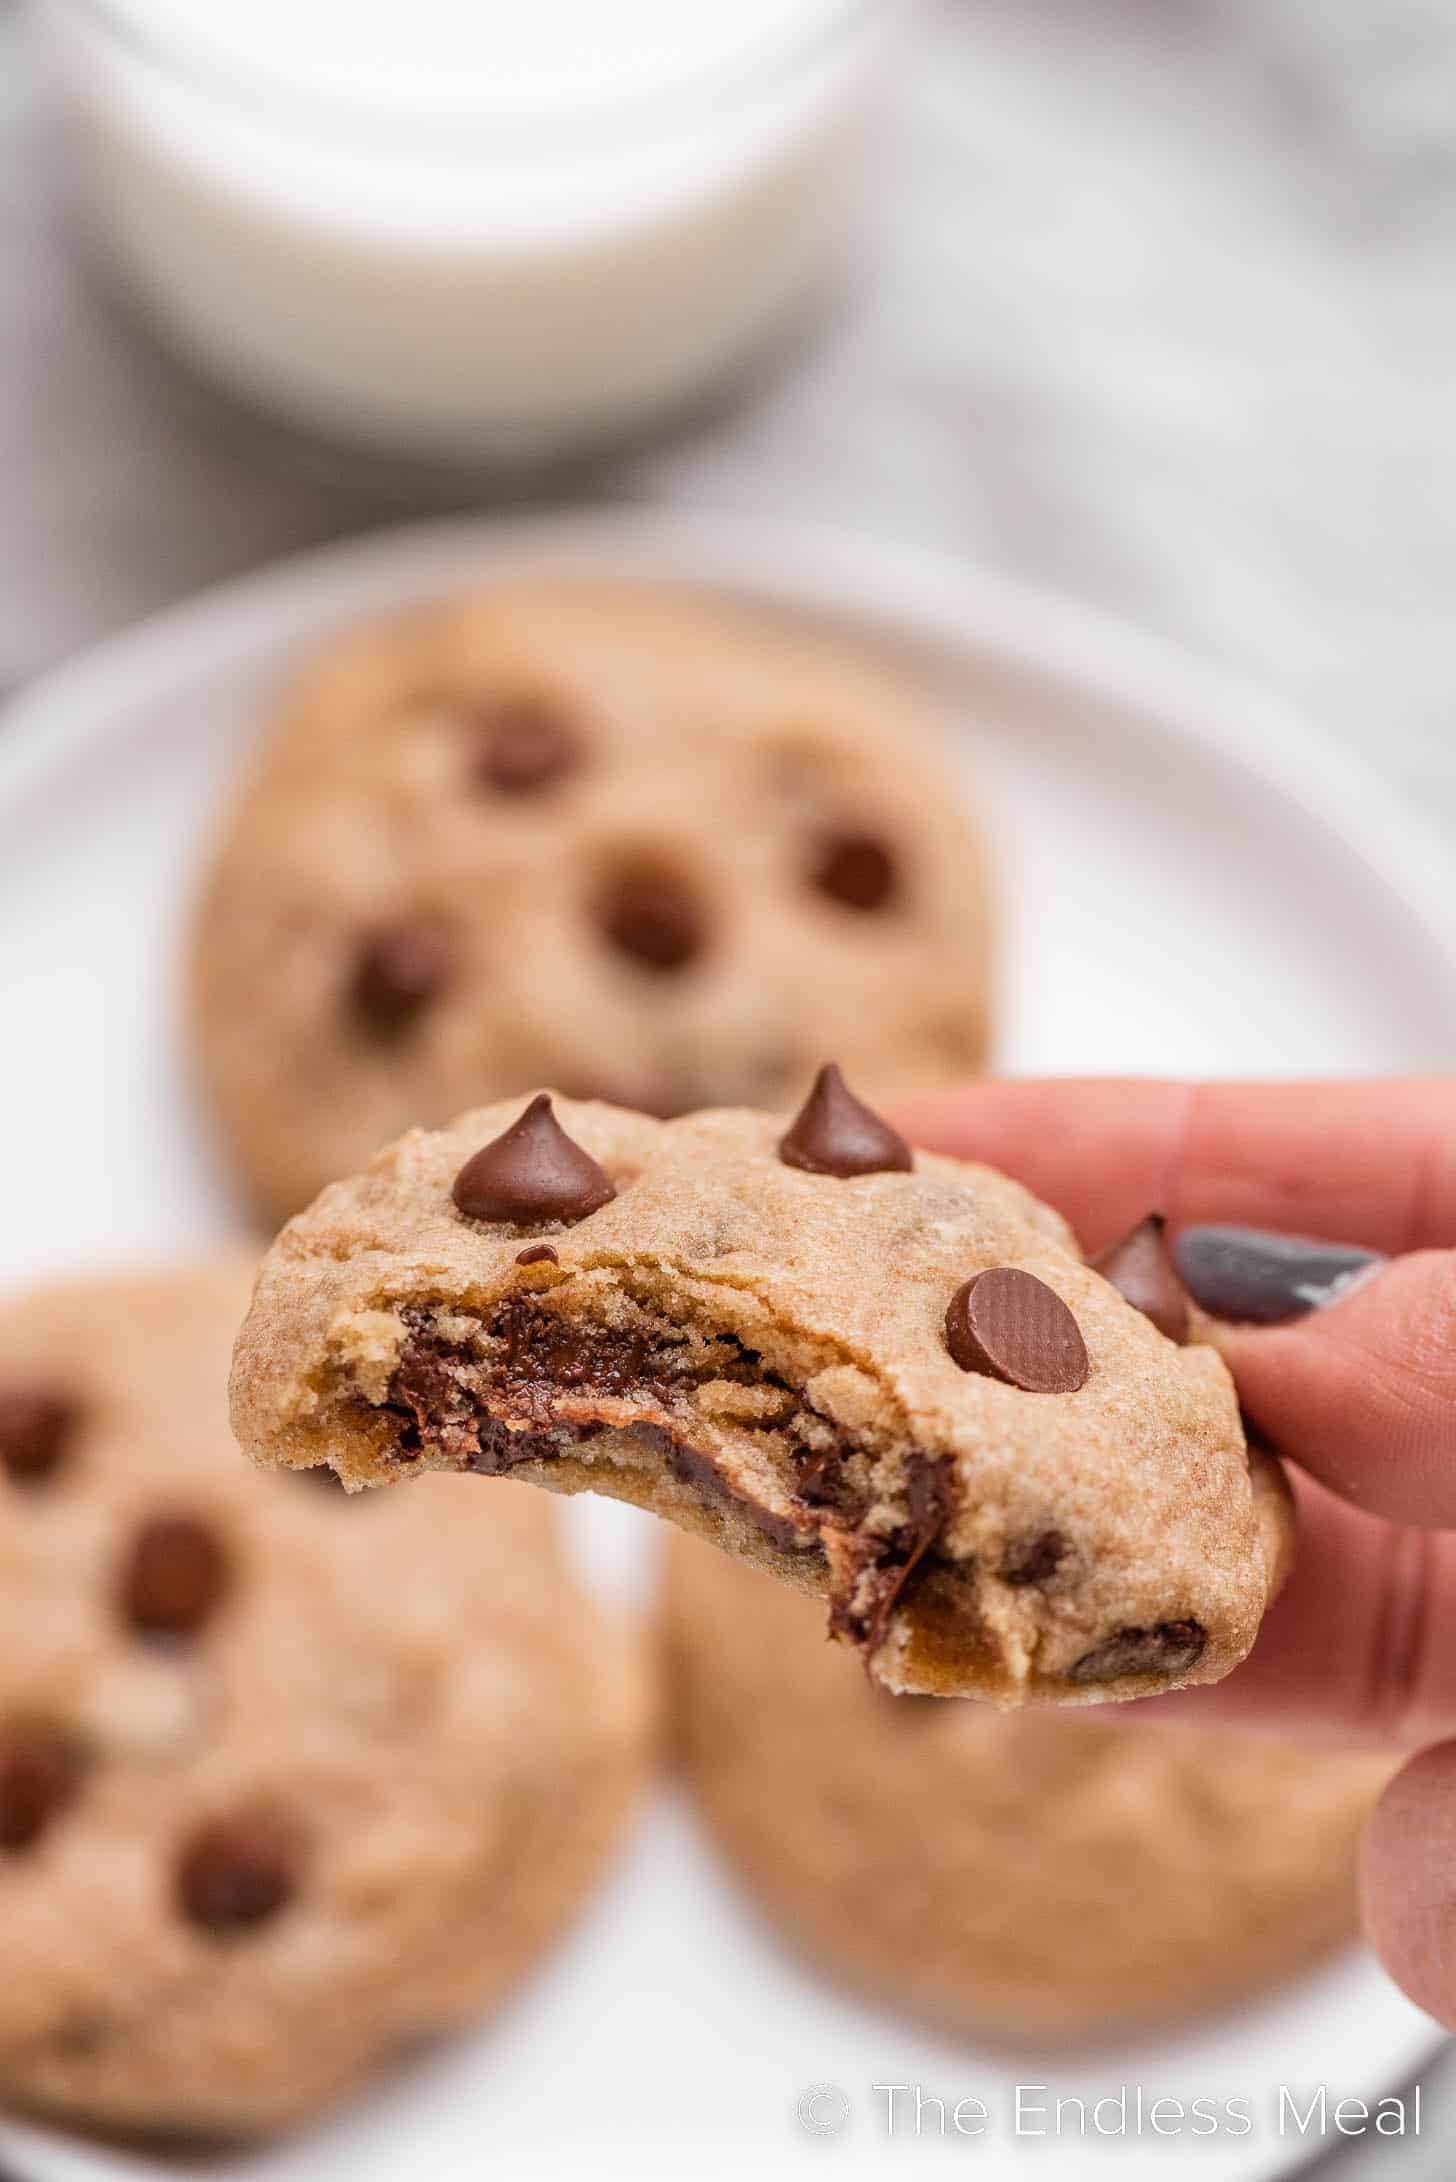 A hand holding a chocolate chip whole wheat cookie with a bite out of it.